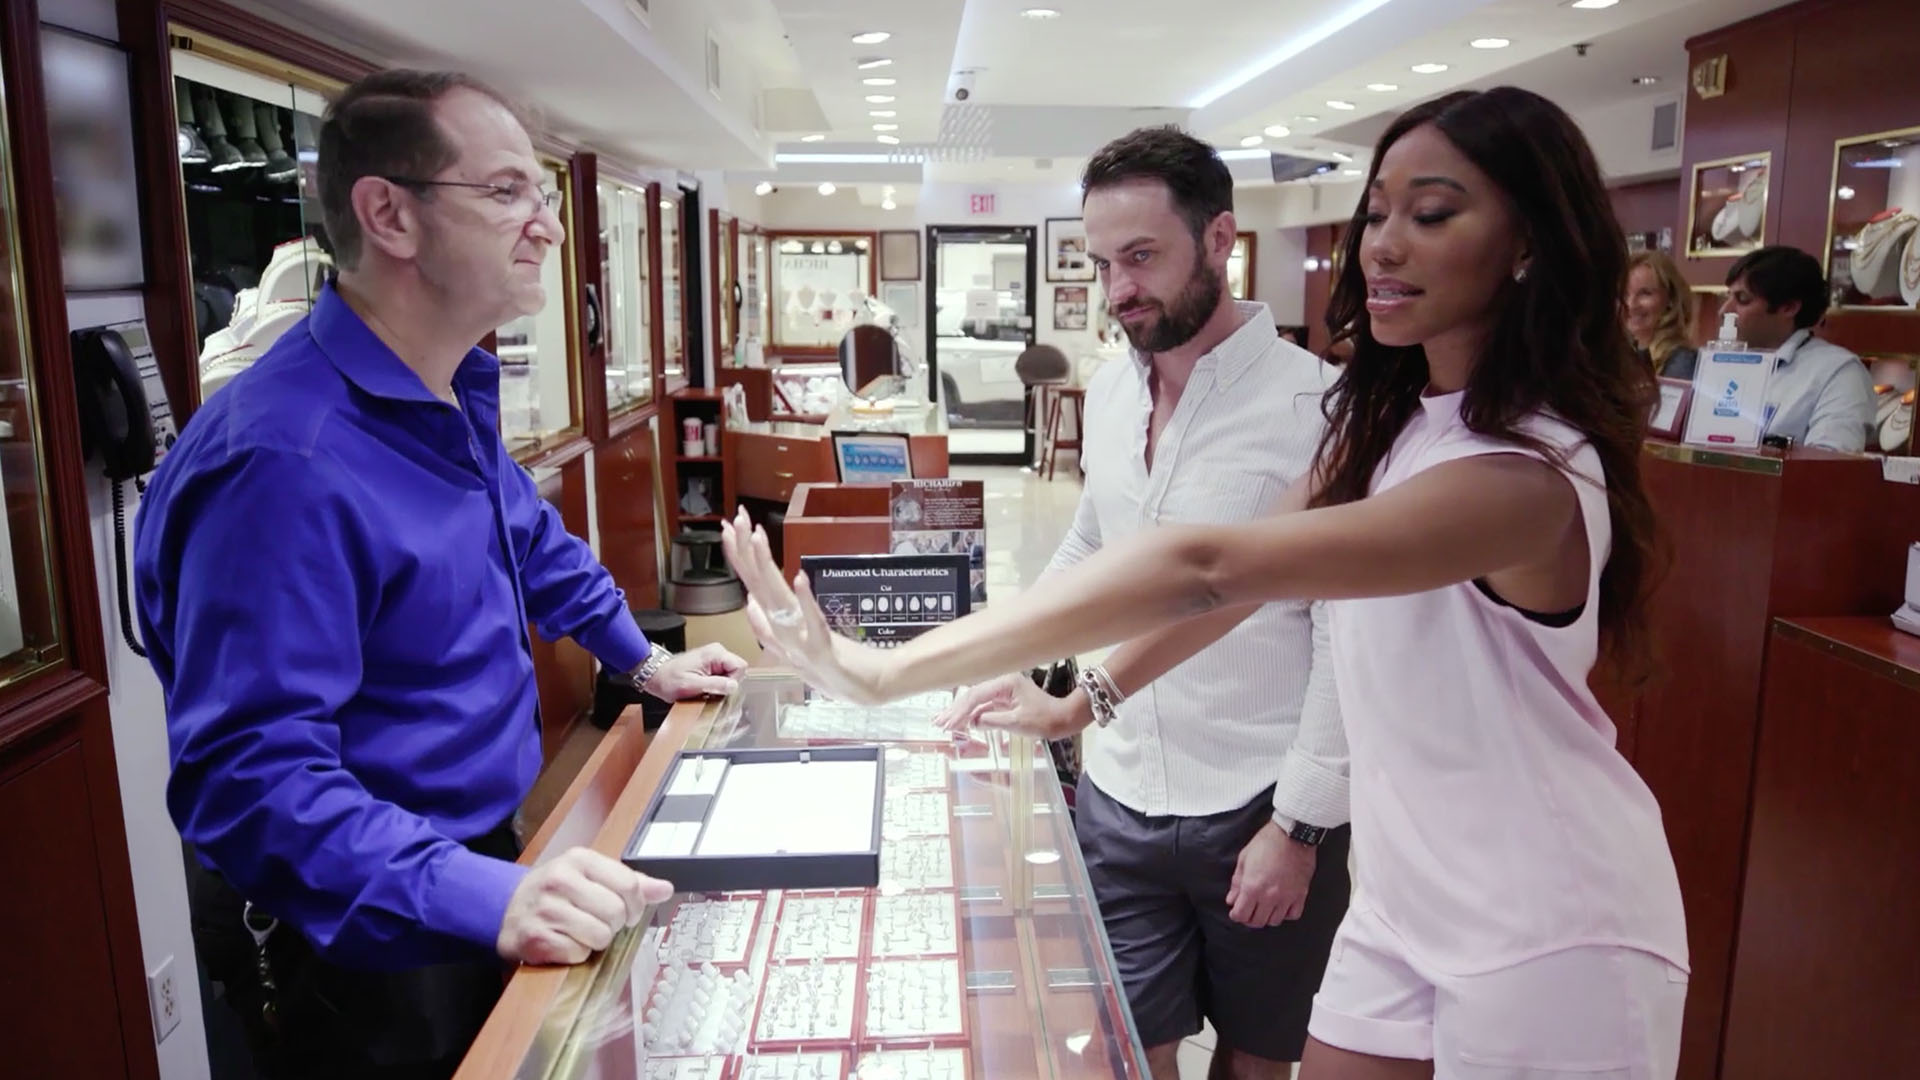 Watch Tee Tee & Shawn Go Ring Shopping! | Growing Up Hip Hop Video Extras